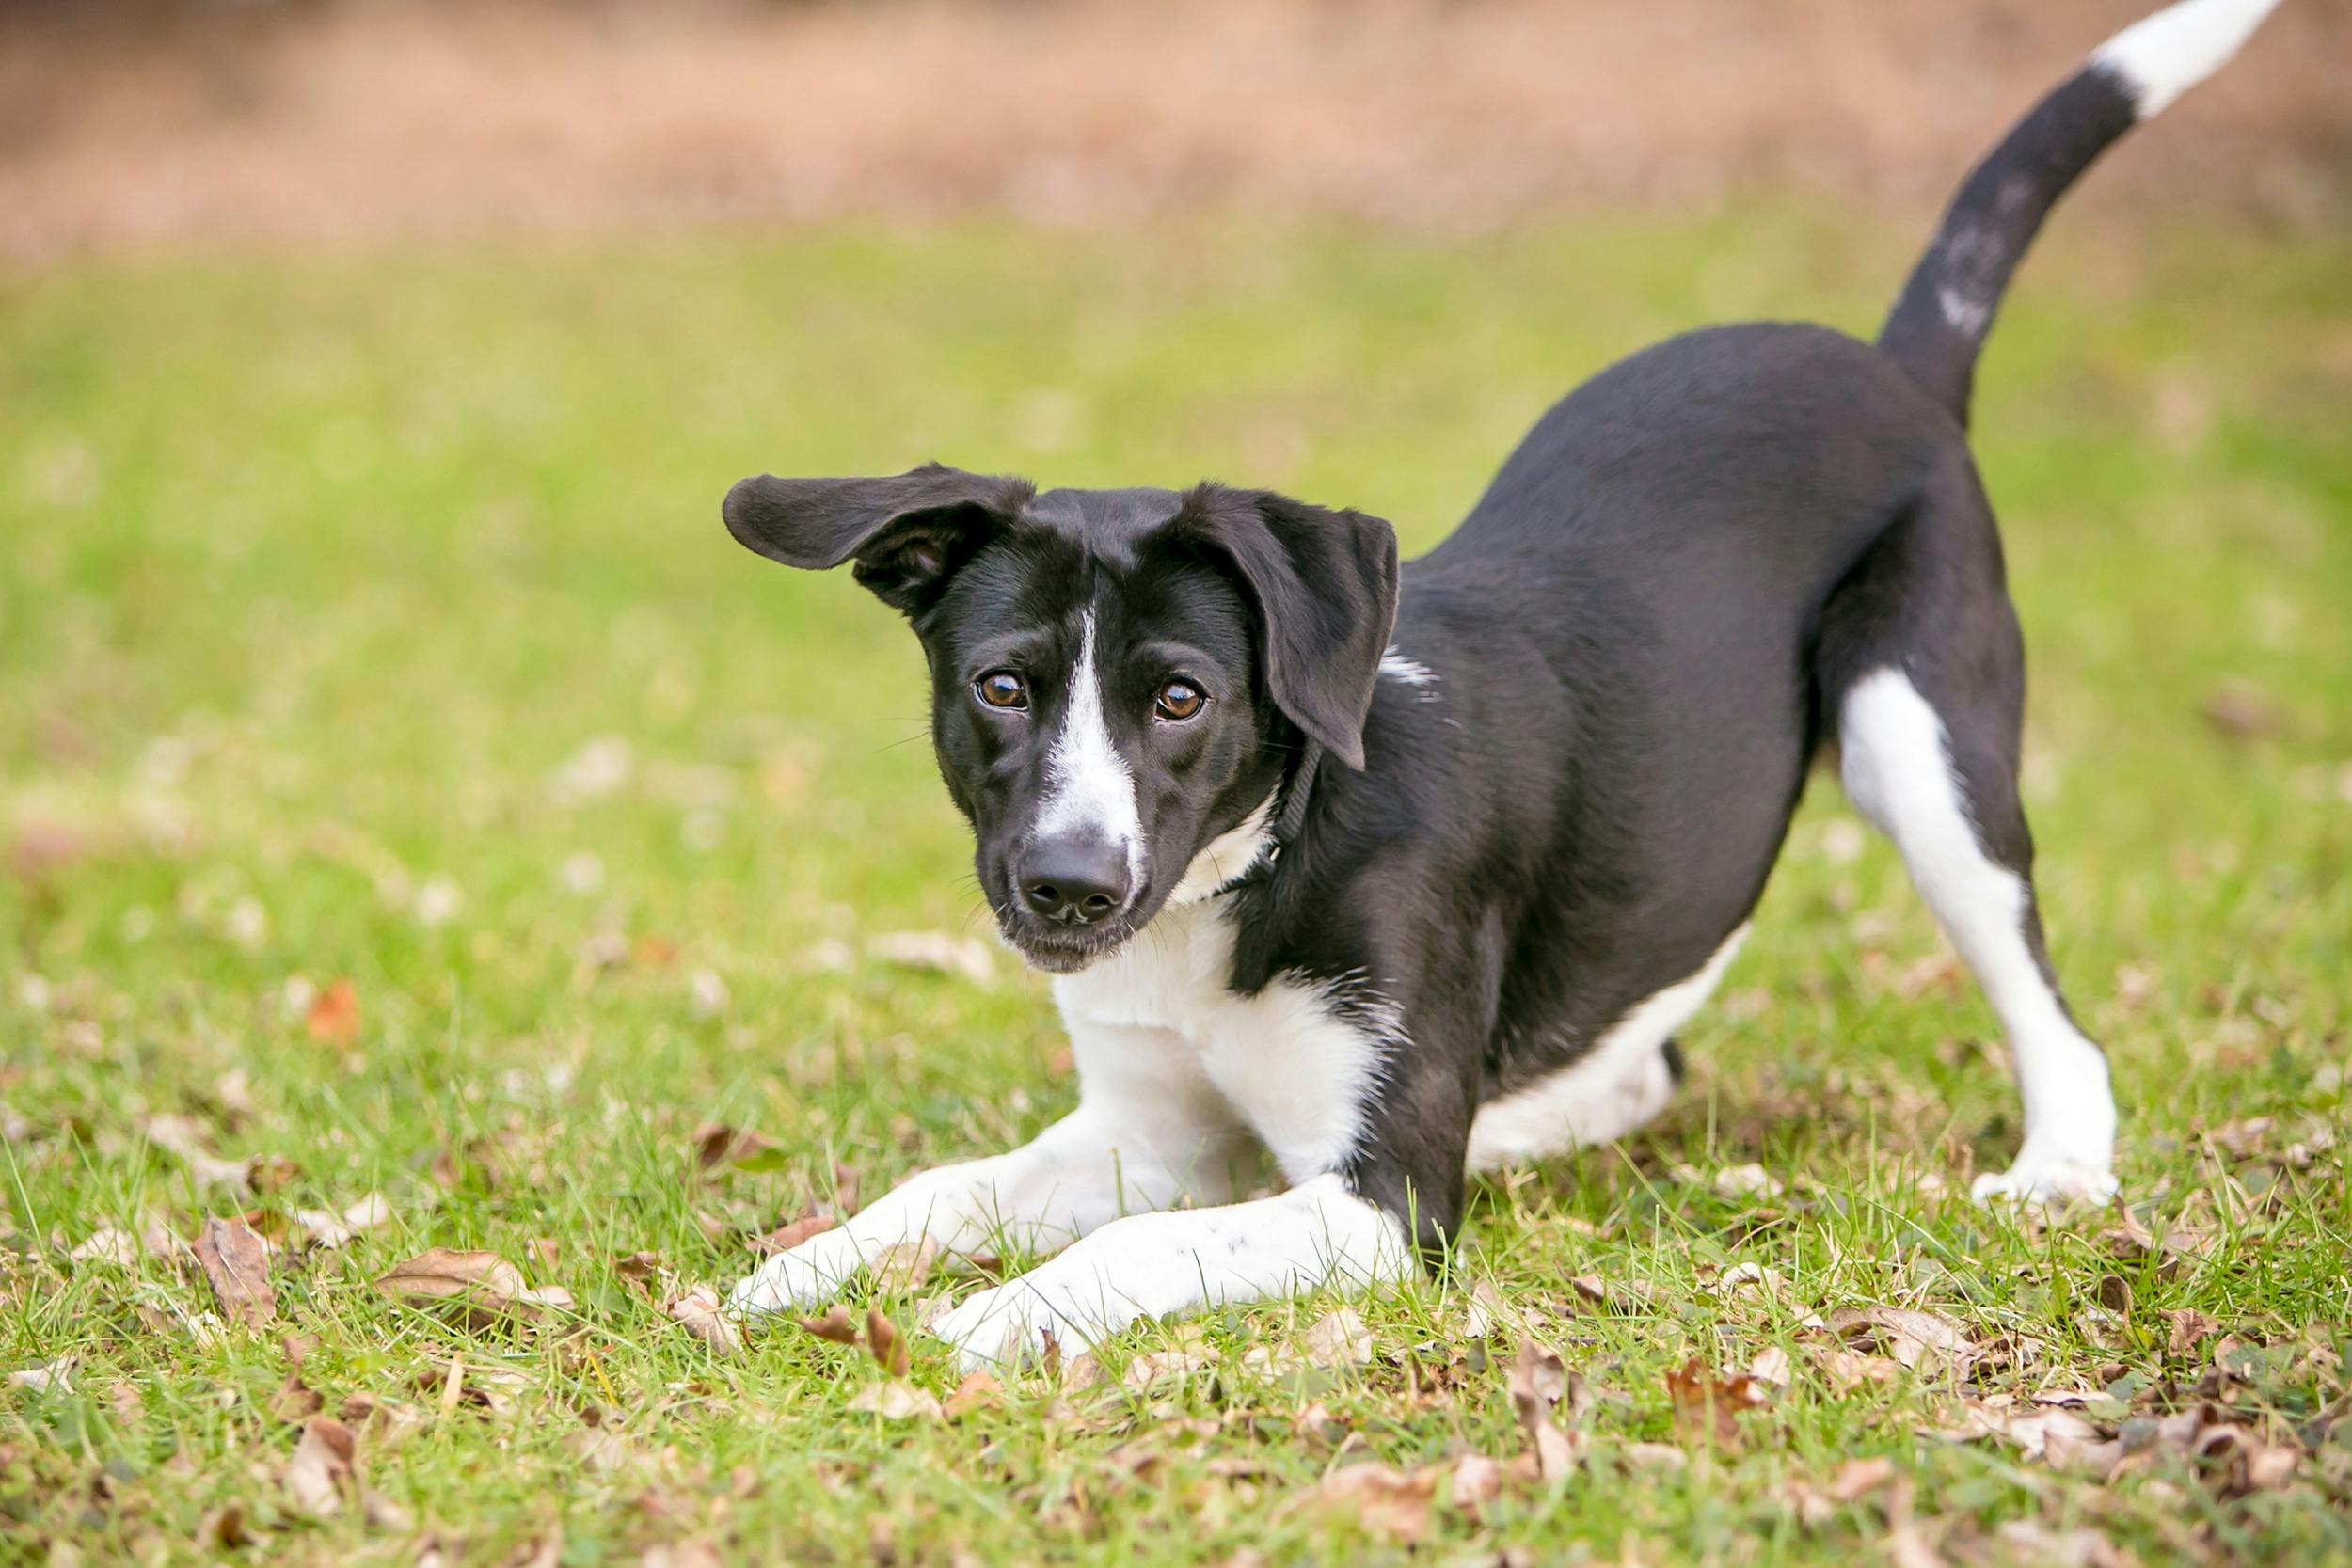 Black and white dog showing a "play bow" position outside.